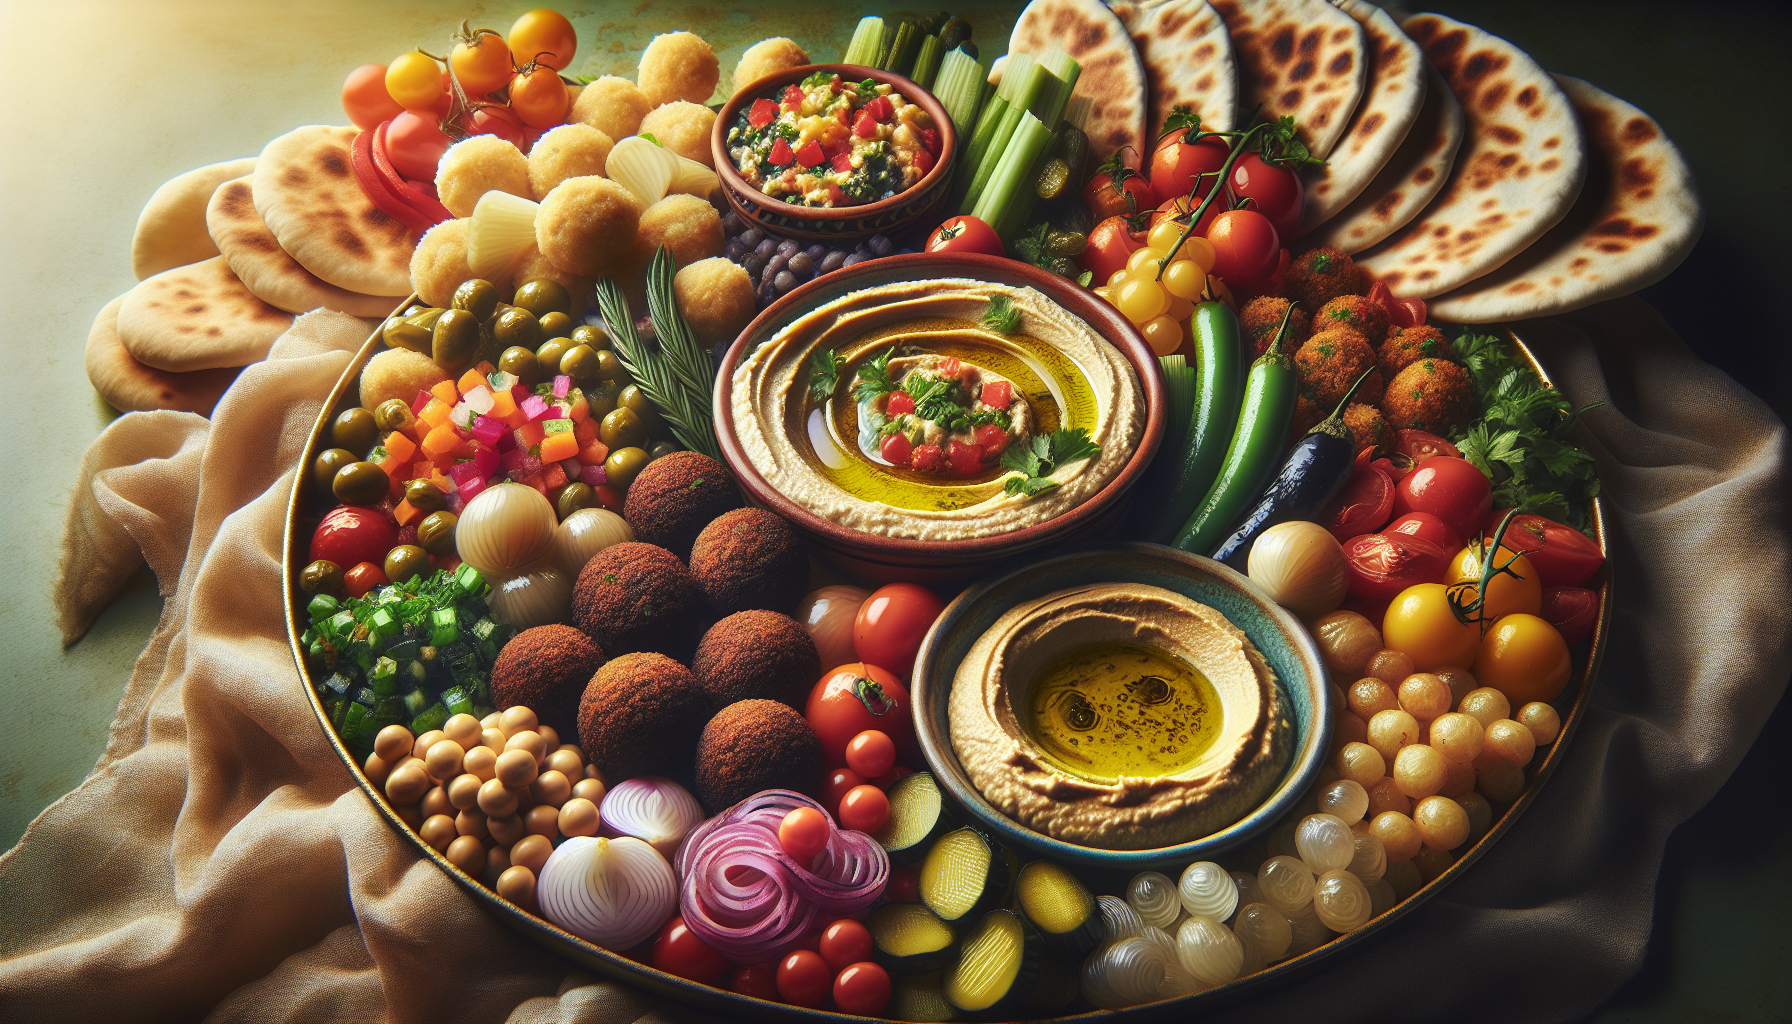 Share Your Middle Eastern Mezze Platter With A Focus On Authentic Flavors.